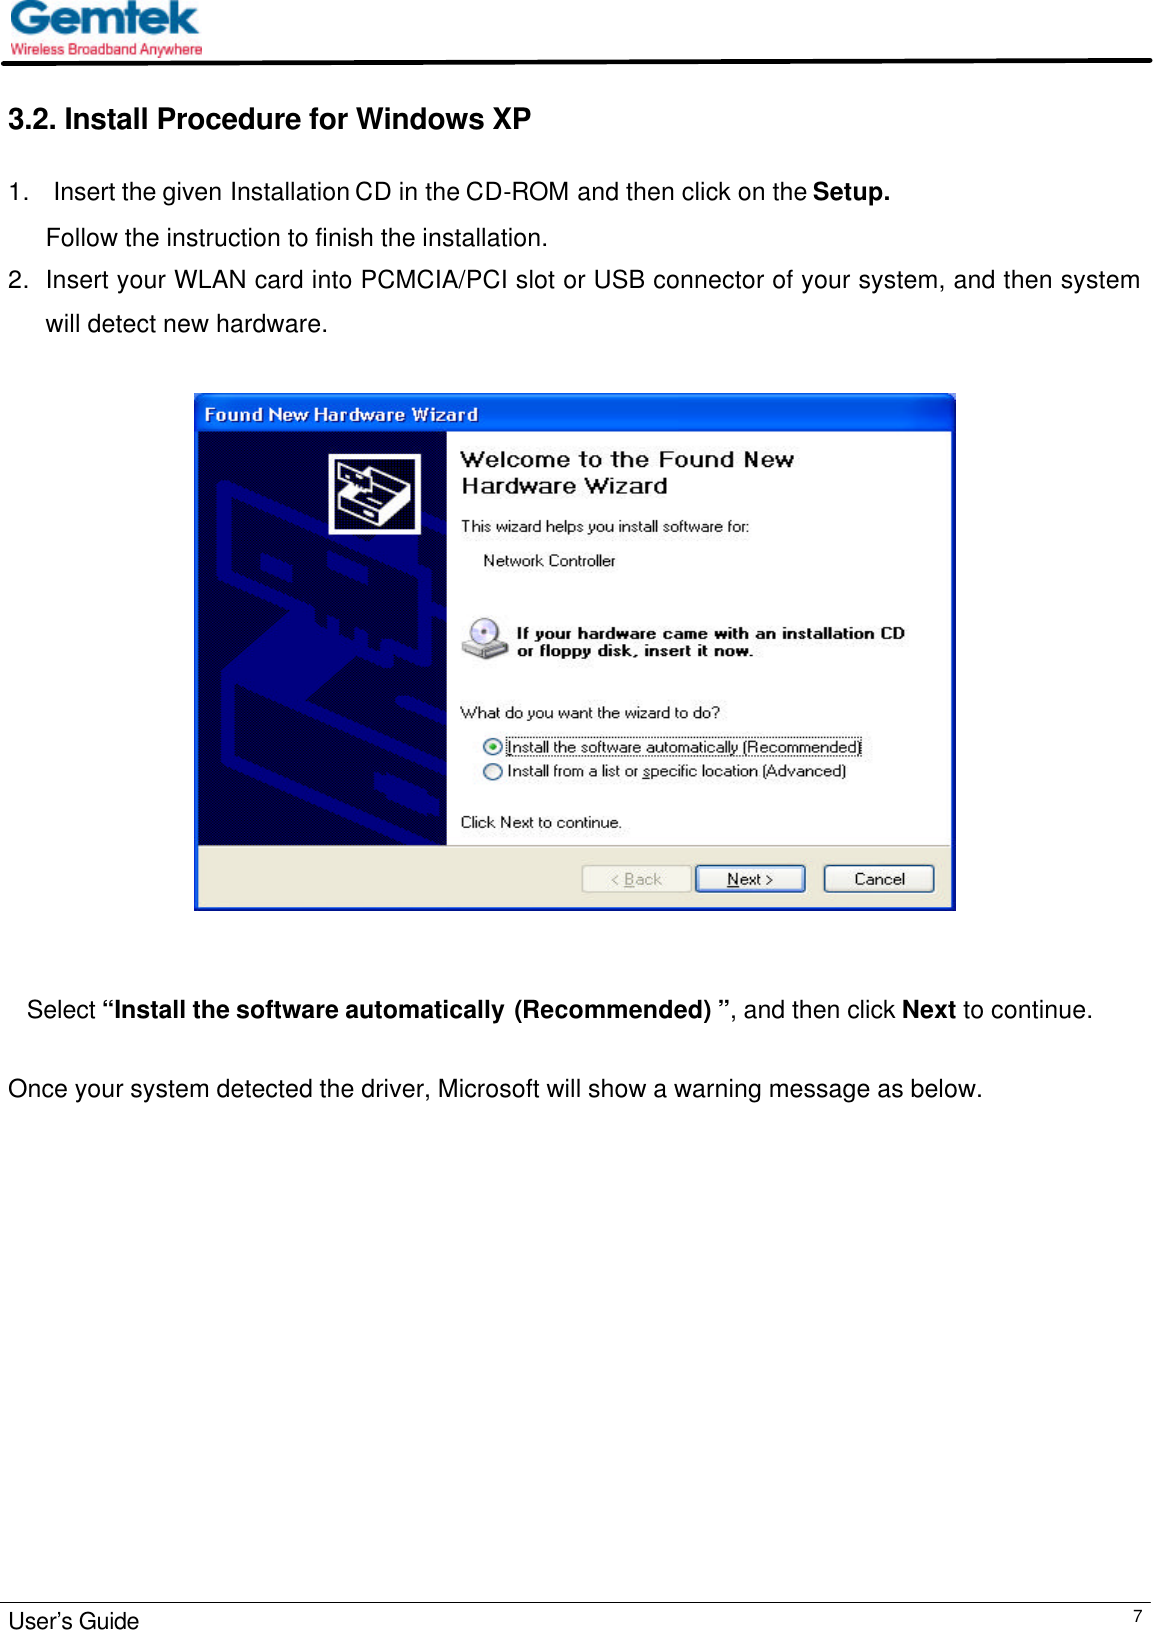                                                                                                                                                                                                                                                          User’s Guide  73.2. Install Procedure for Windows XP  1.   Insert the given Installation CD in the CD-ROM and then click on the Setup. Follow the instruction to finish the installation.  2. Insert your WLAN card into PCMCIA/PCI slot or USB connector of your system, and then system will detect new hardware.          Select “Install the software automatically (Recommended) ”, and then click Next to continue.                          Once your system detected the driver, Microsoft will show a warning message as below.  